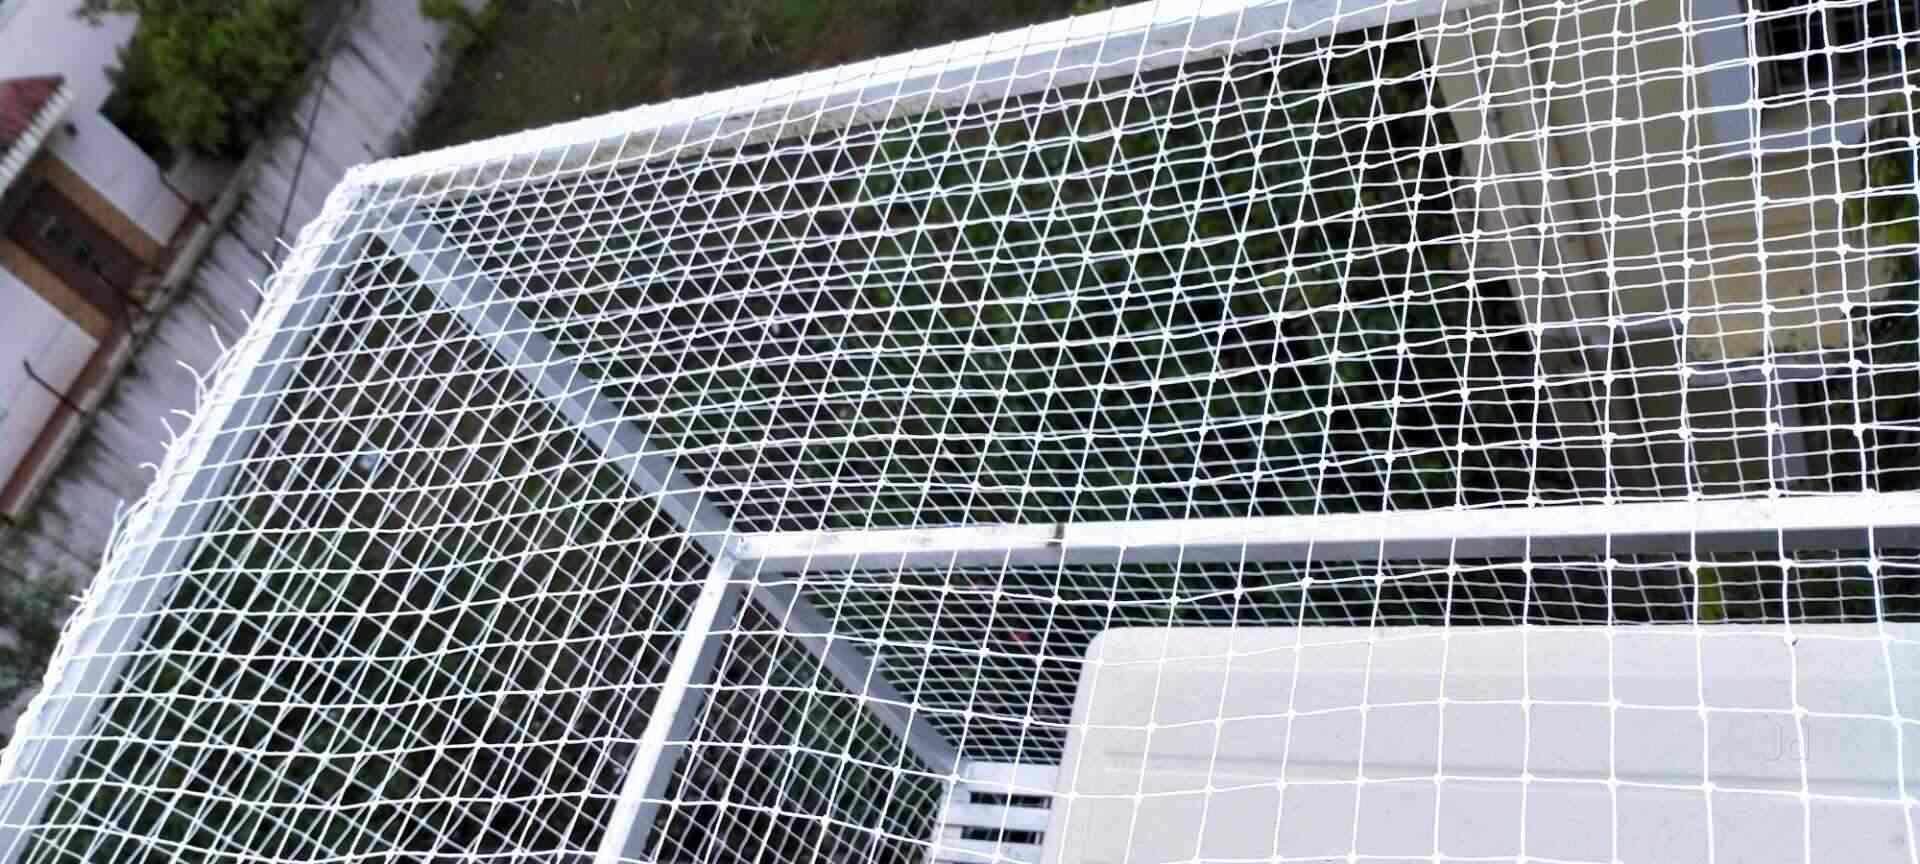 Protect Your Property and Crops with Bird Netting - Netting Experts